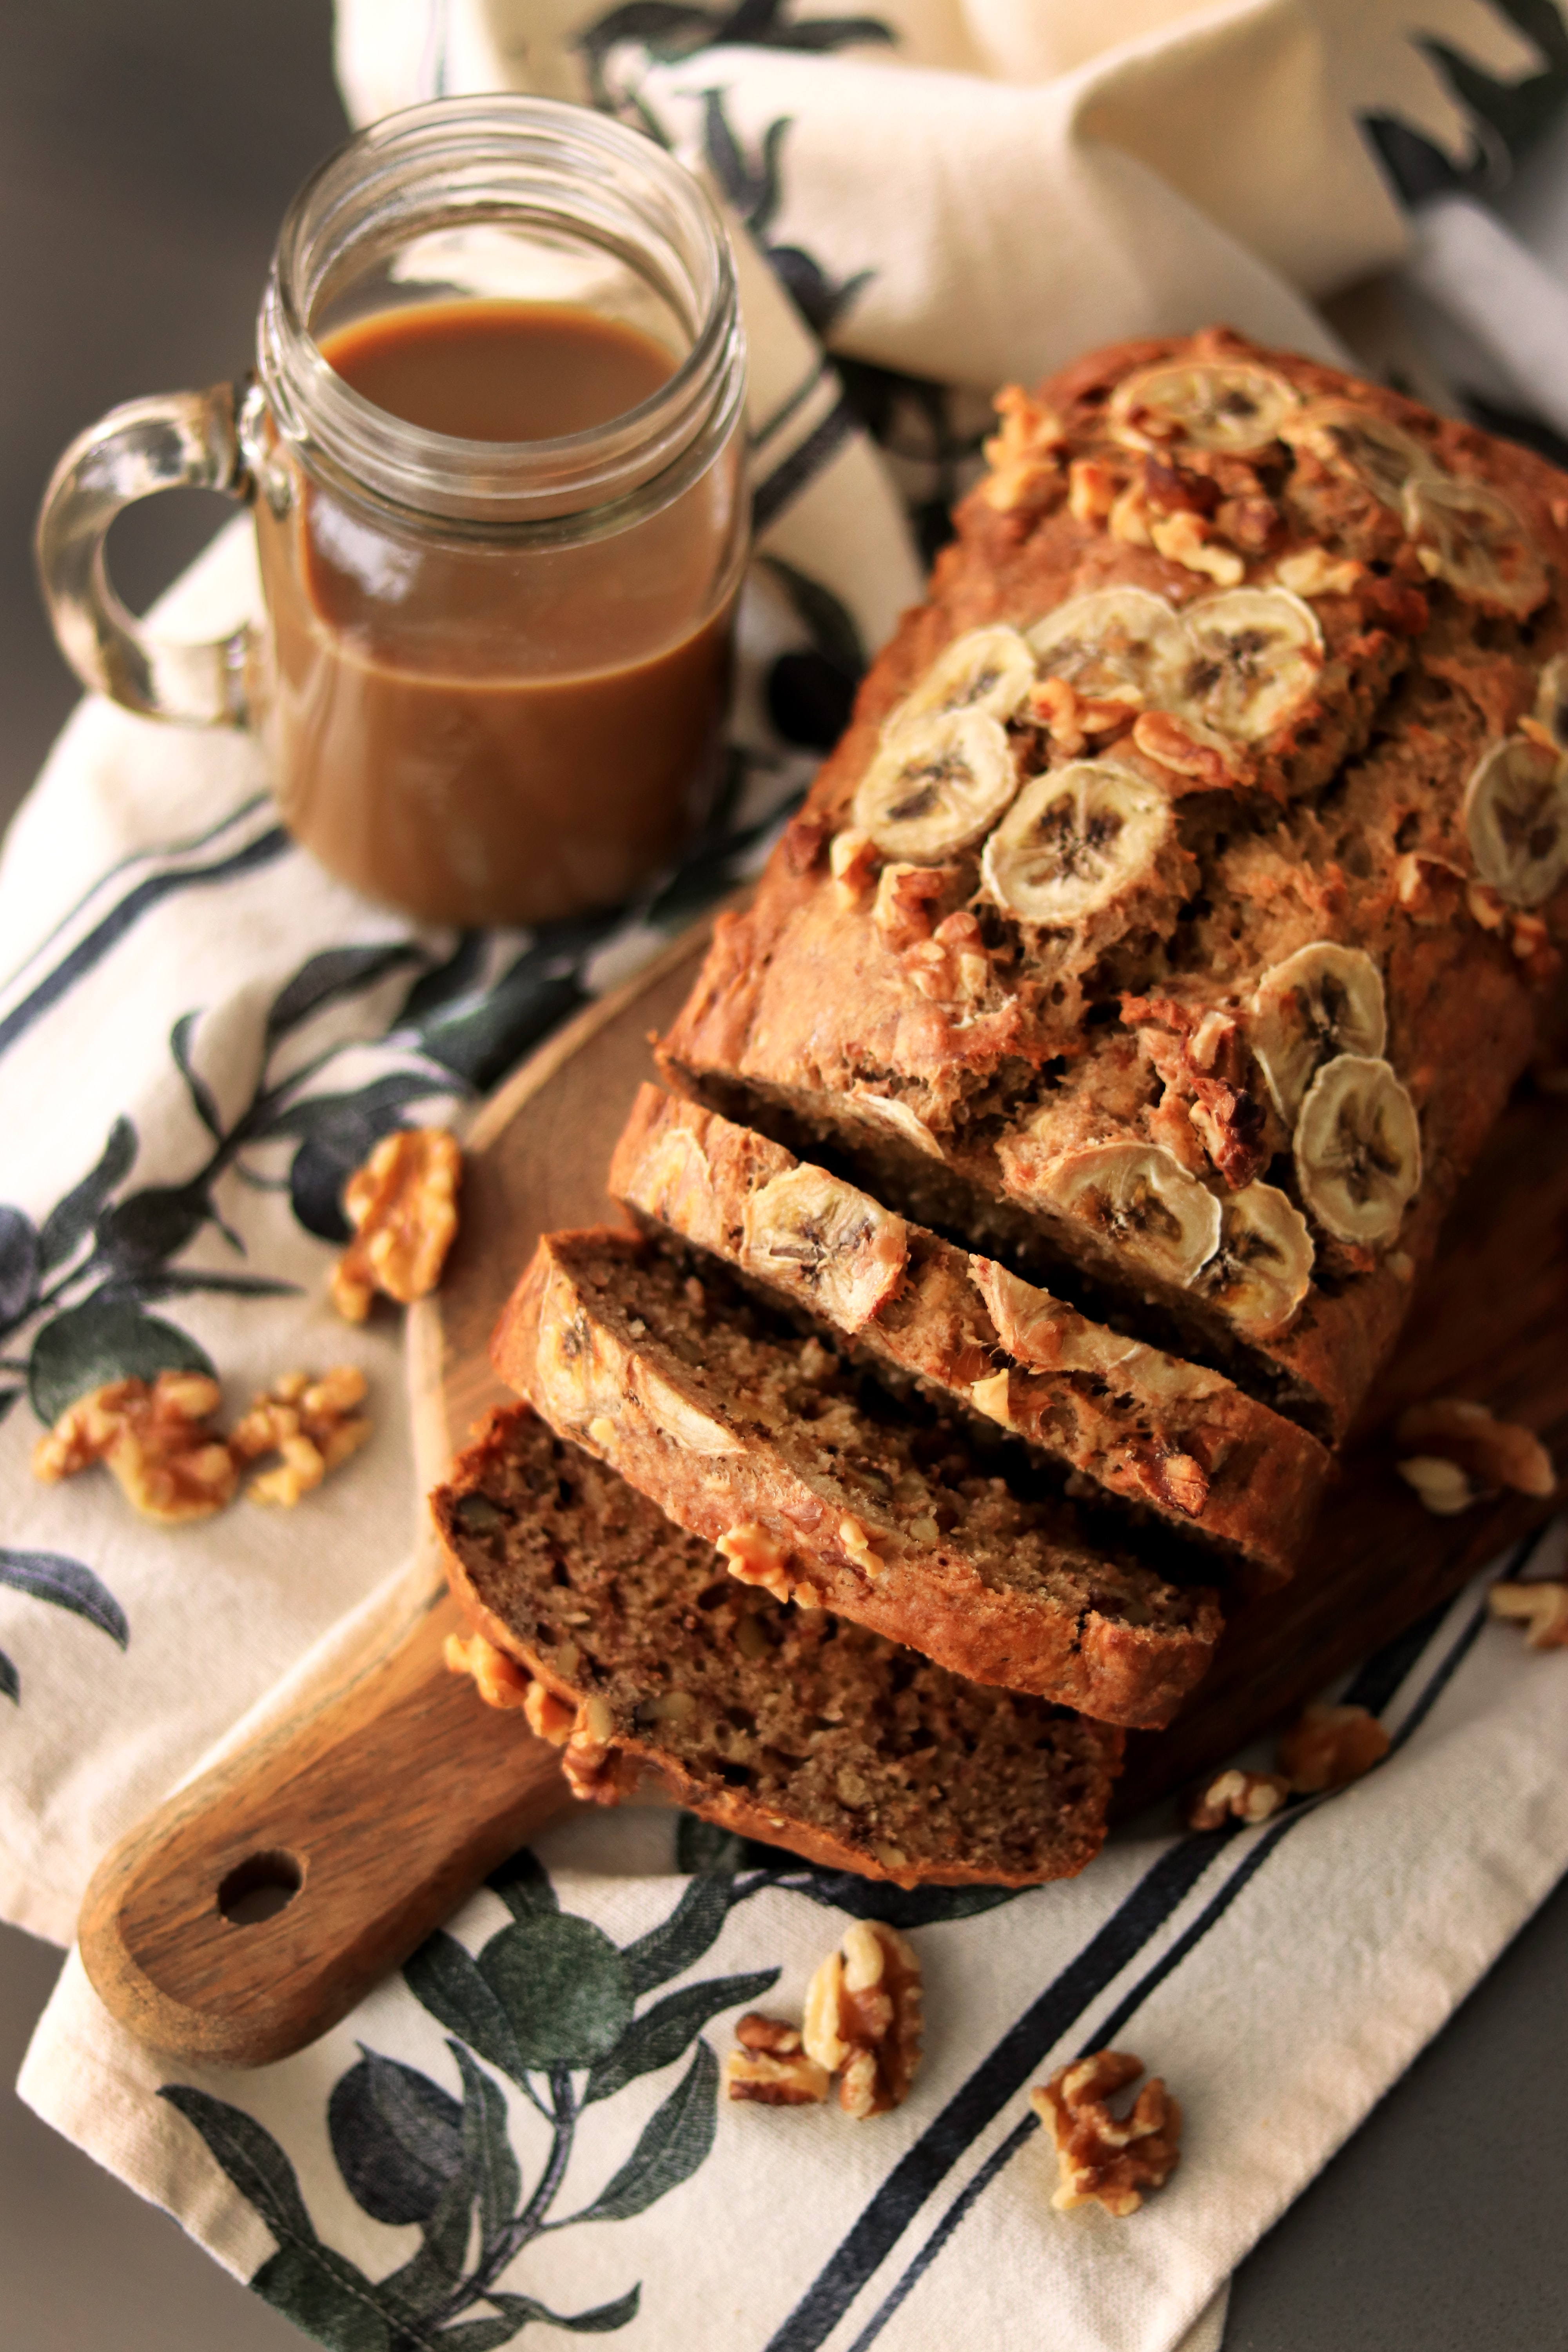 A strong source of essential vitamins and minerals, banana bread is high in potassium and vitamin B6.(Unsplash)